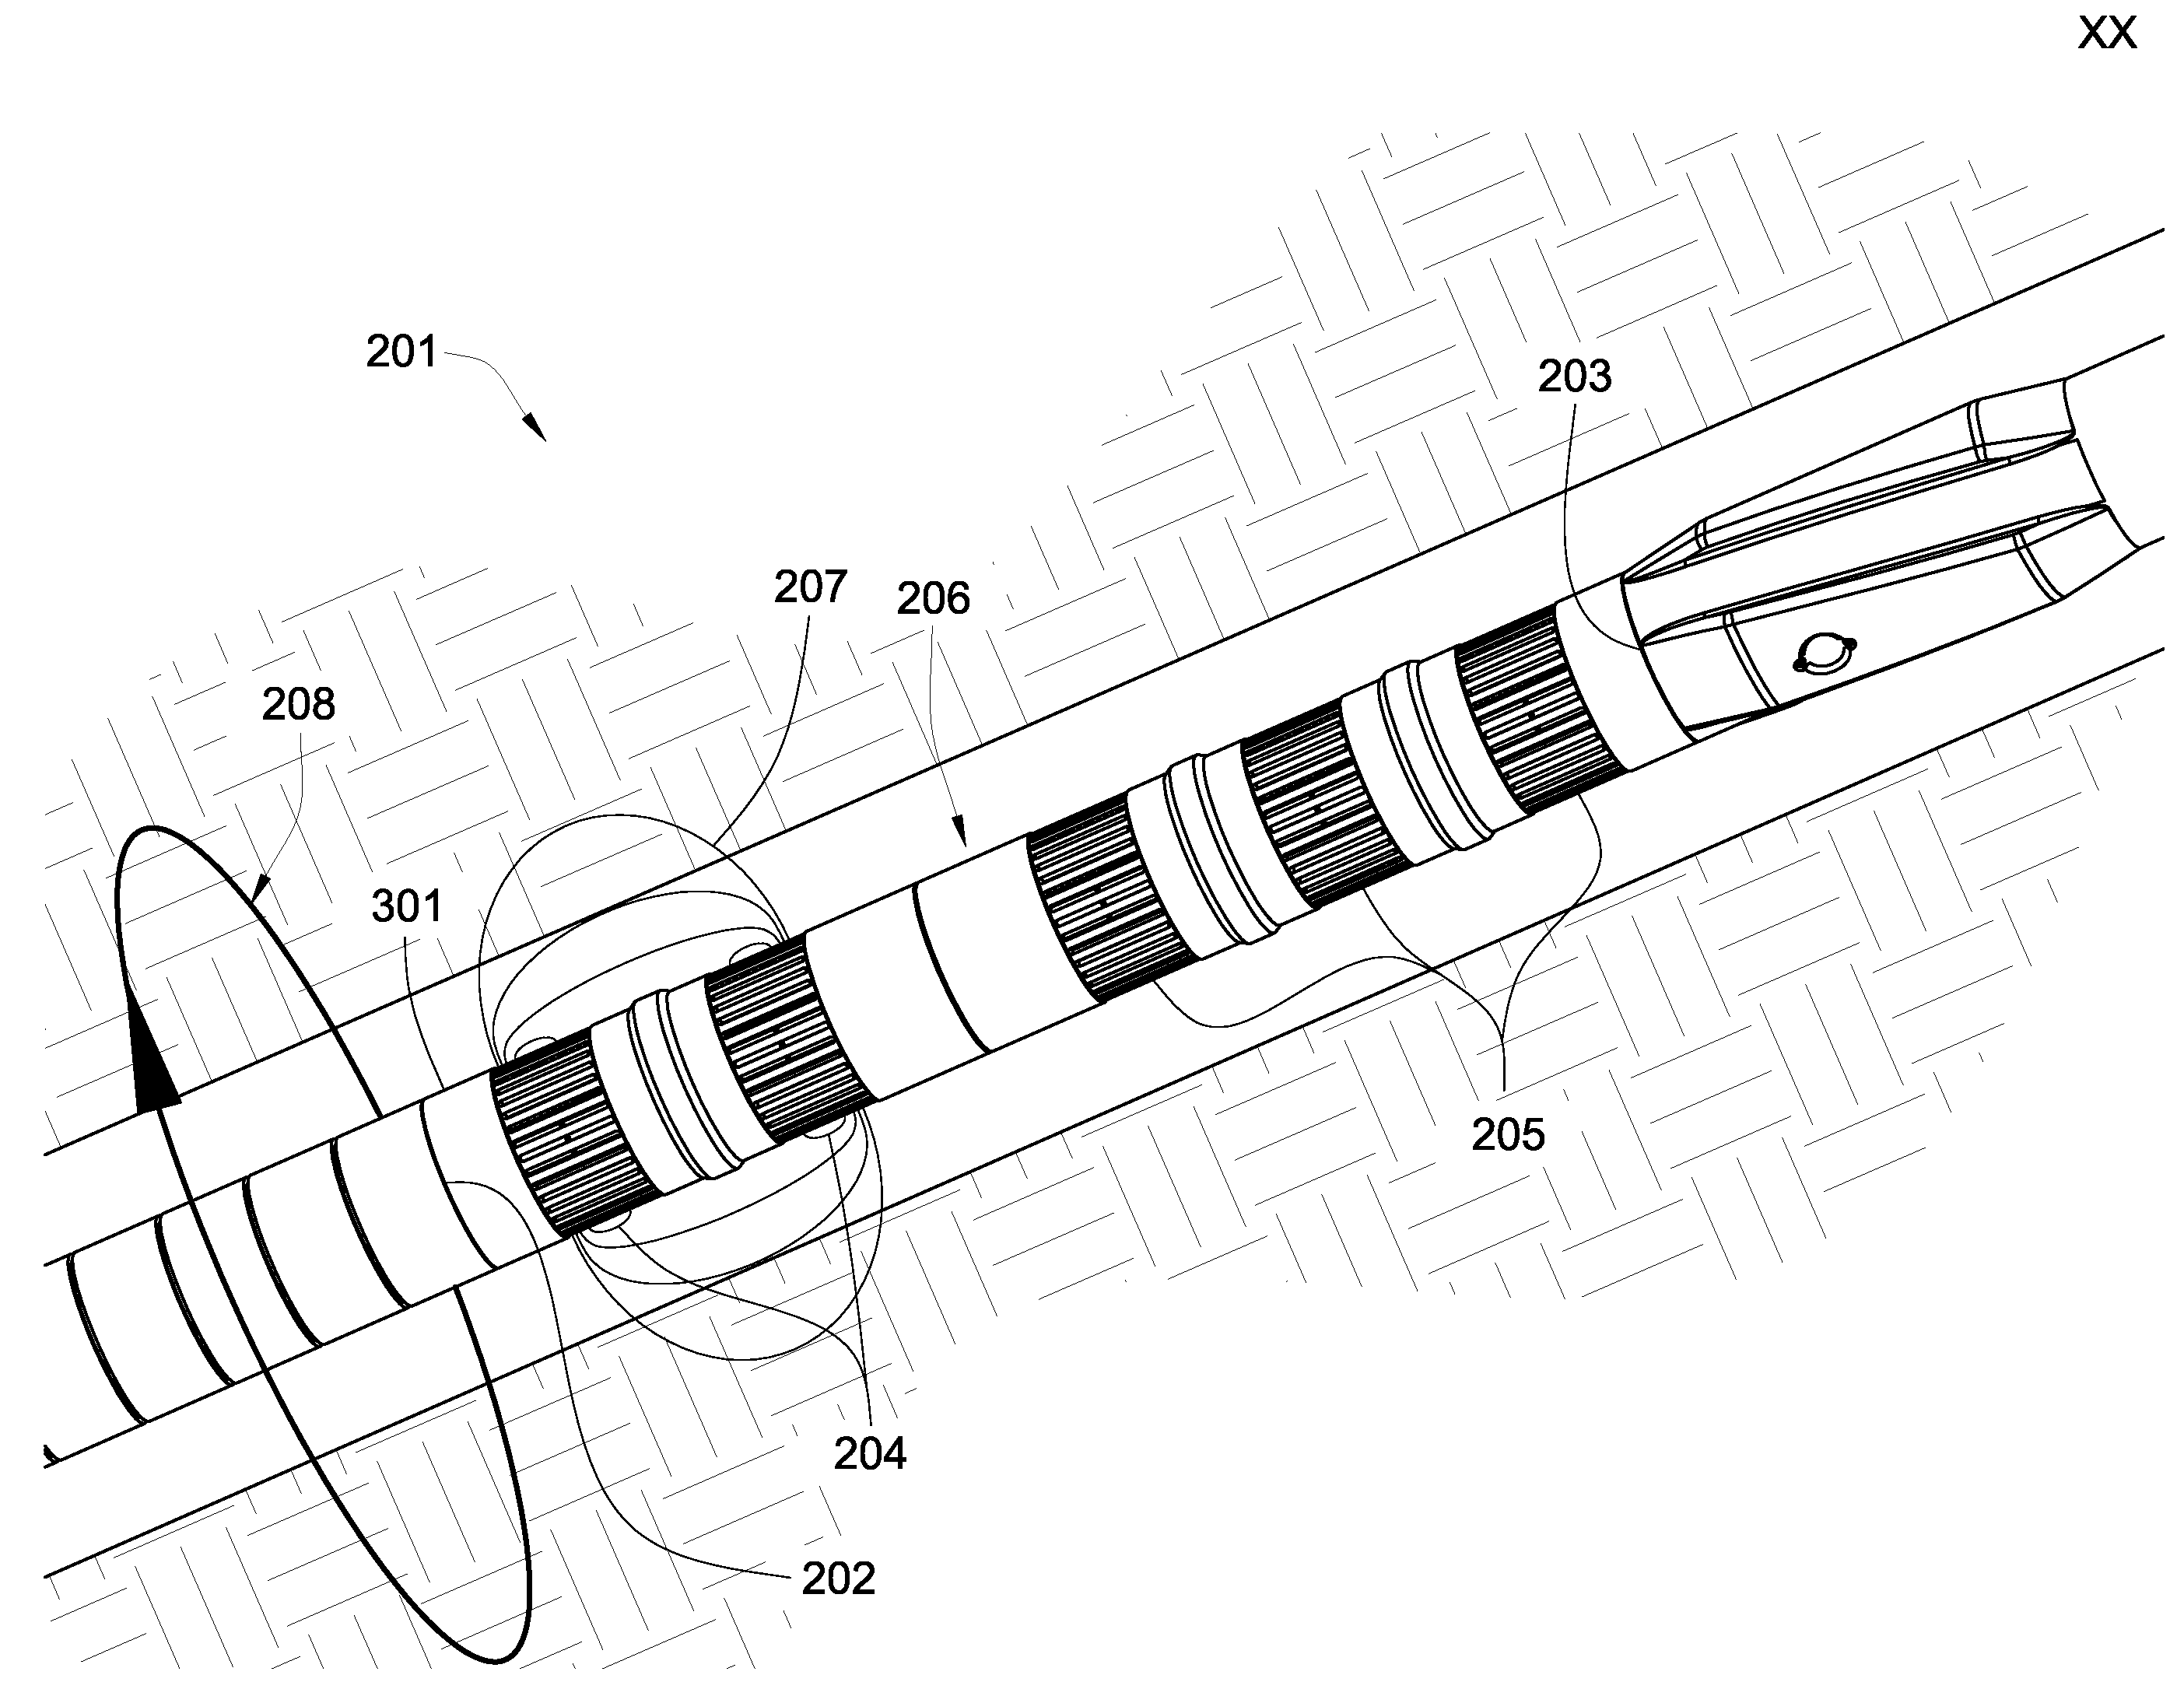 Externally Guided and Directed Field Induction Resistivity Tool